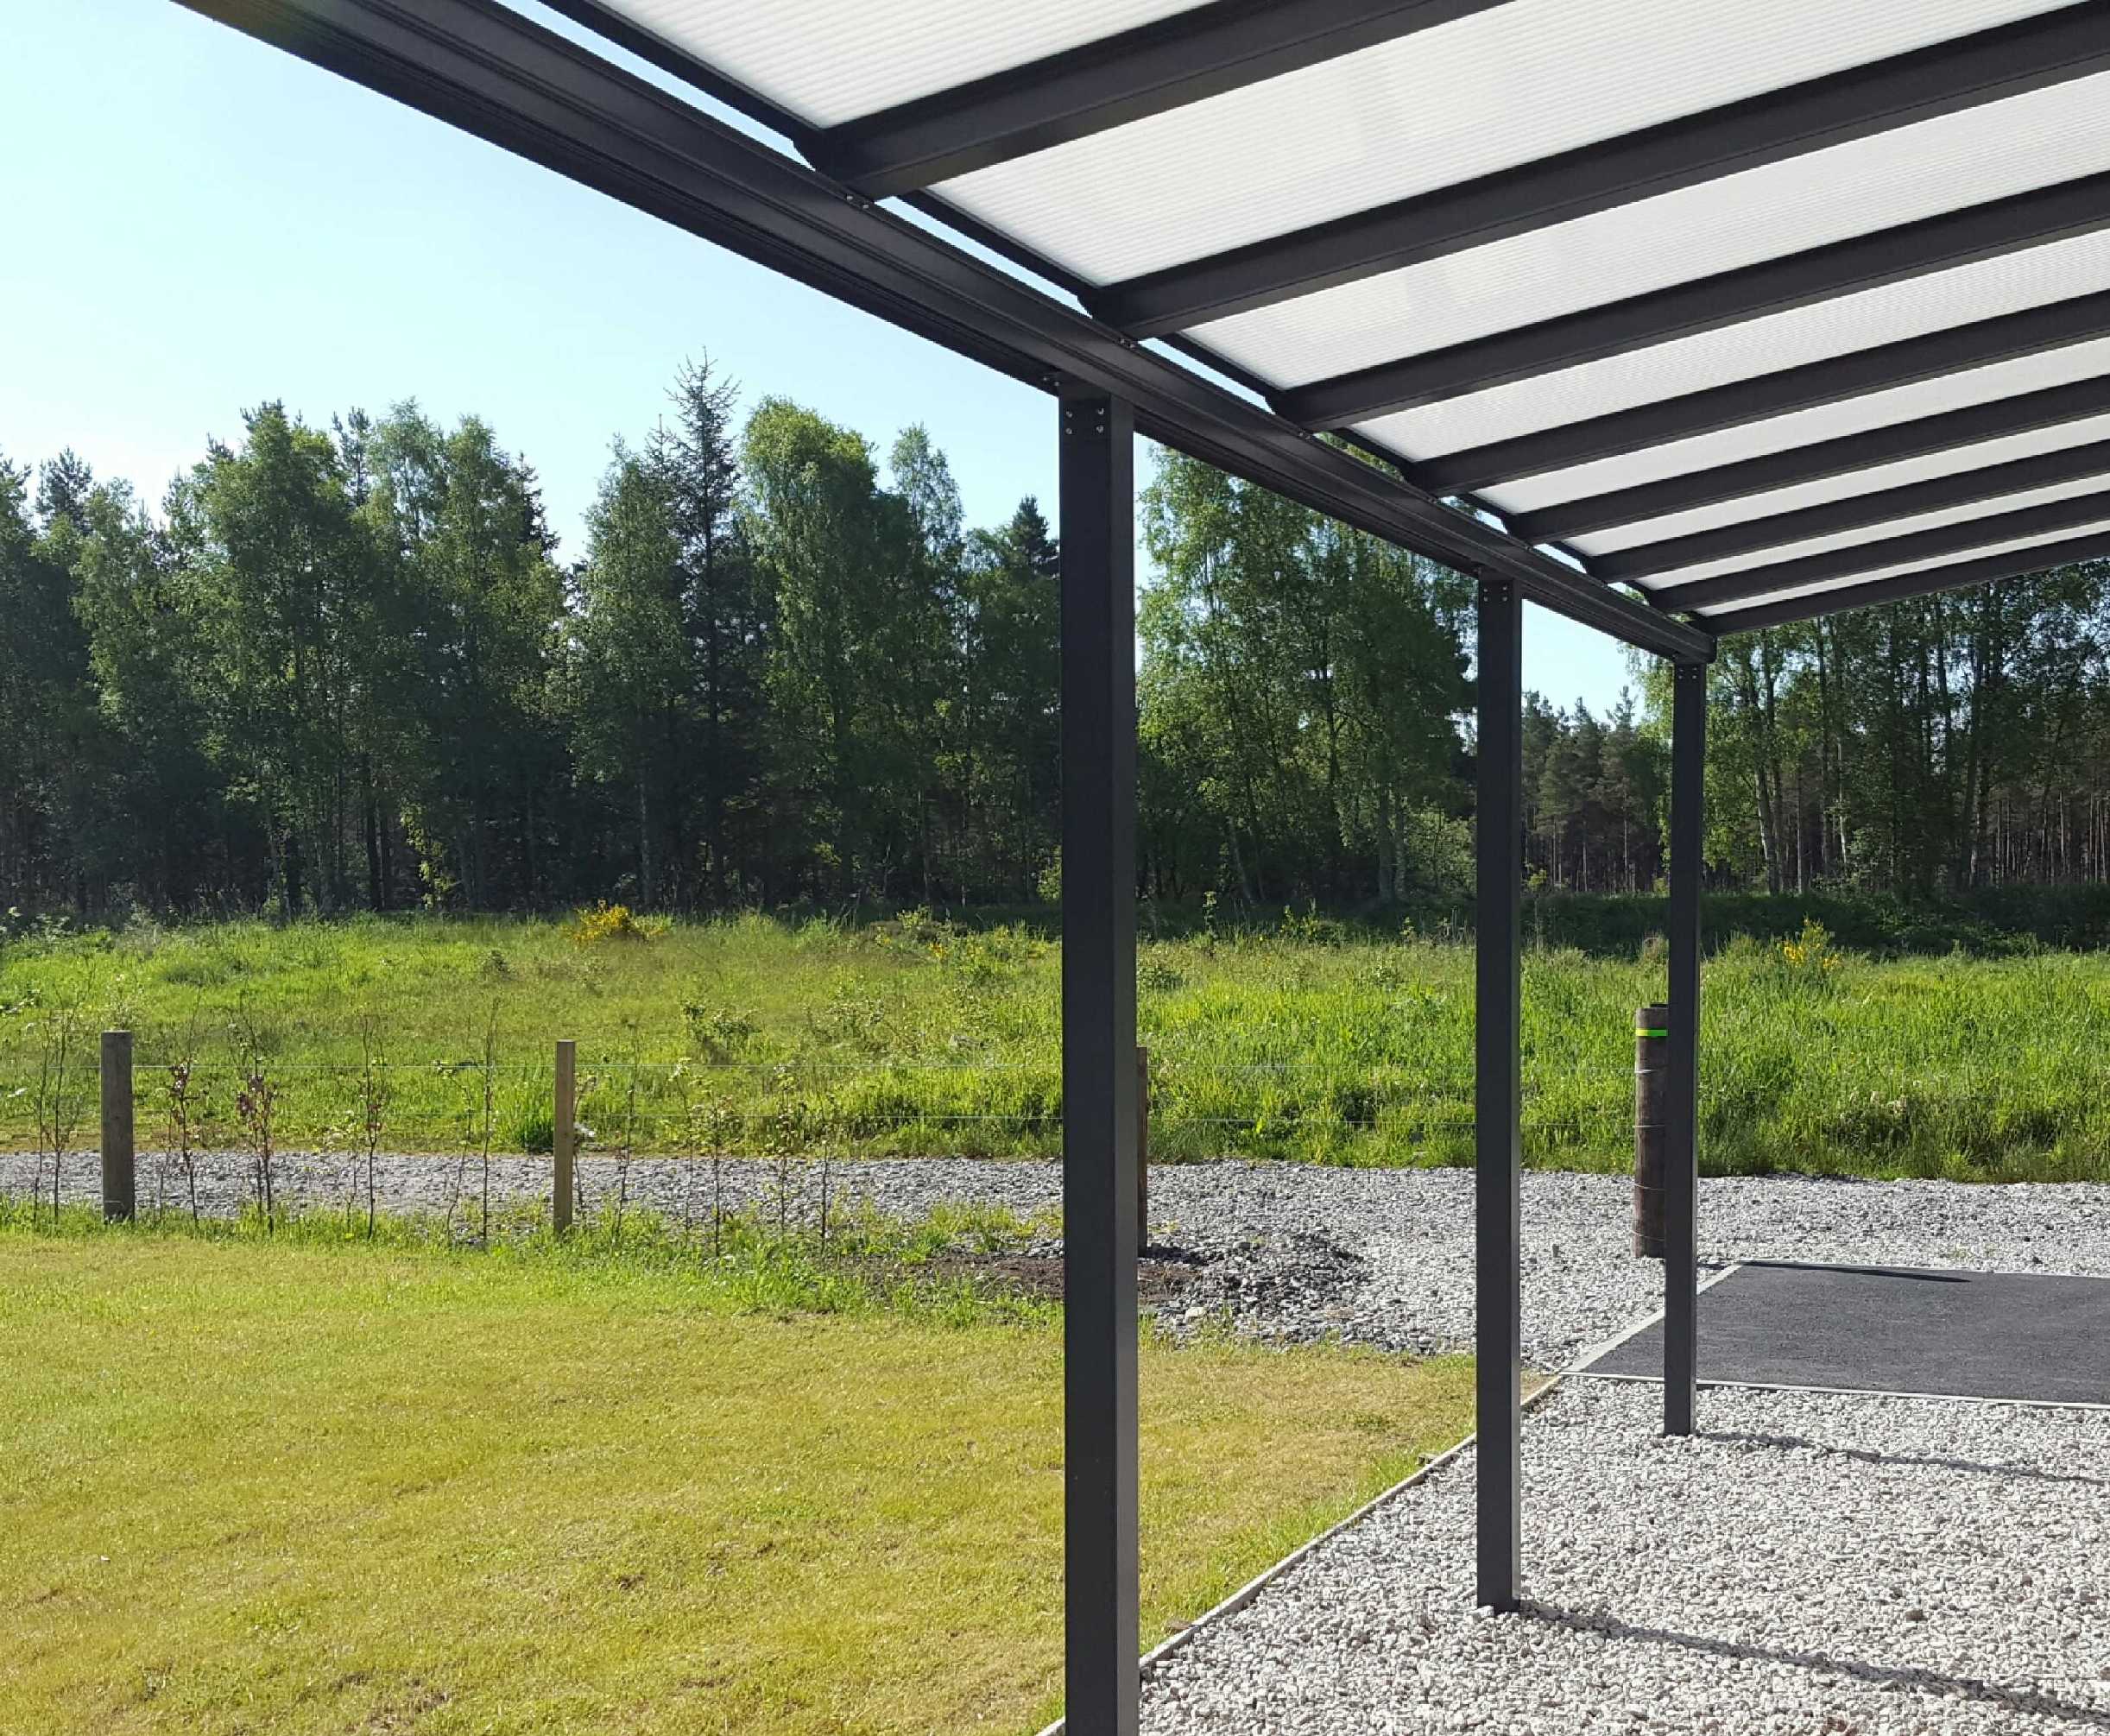 Omega Smart Lean-To Canopy, Anthracite Grey, 6mm Glass Clear Plate Polycarbonate Glazing - 4.9m (W) x 2.5m (P), (3) Supporting Posts